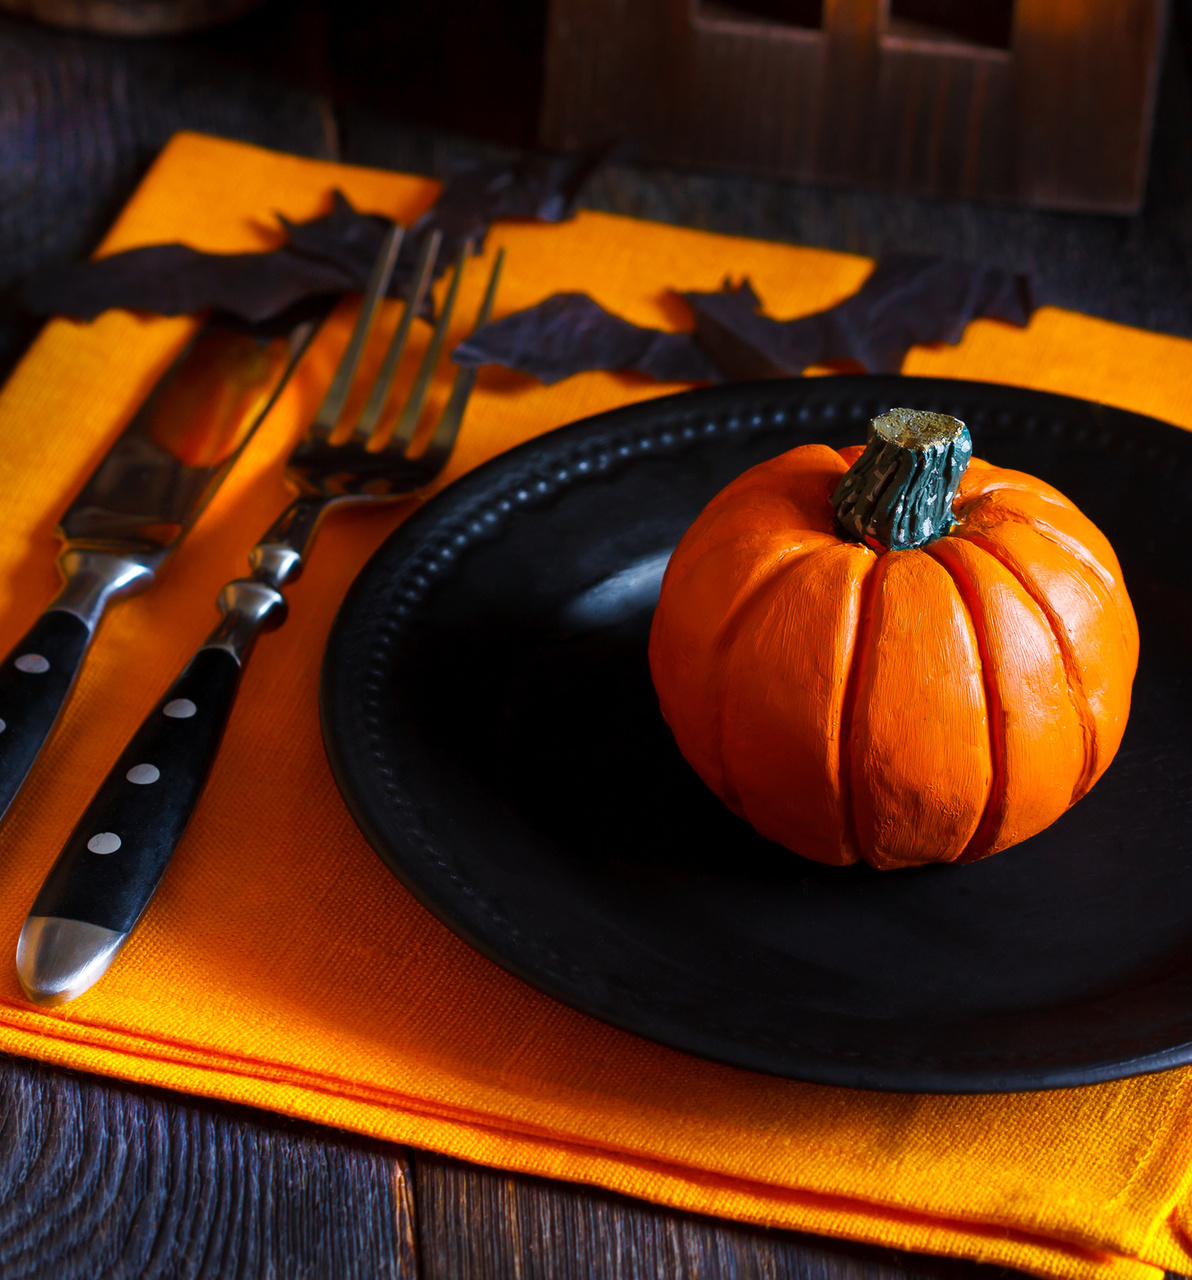 Frightful Halloween Tablescapes - Black and Orange Decor